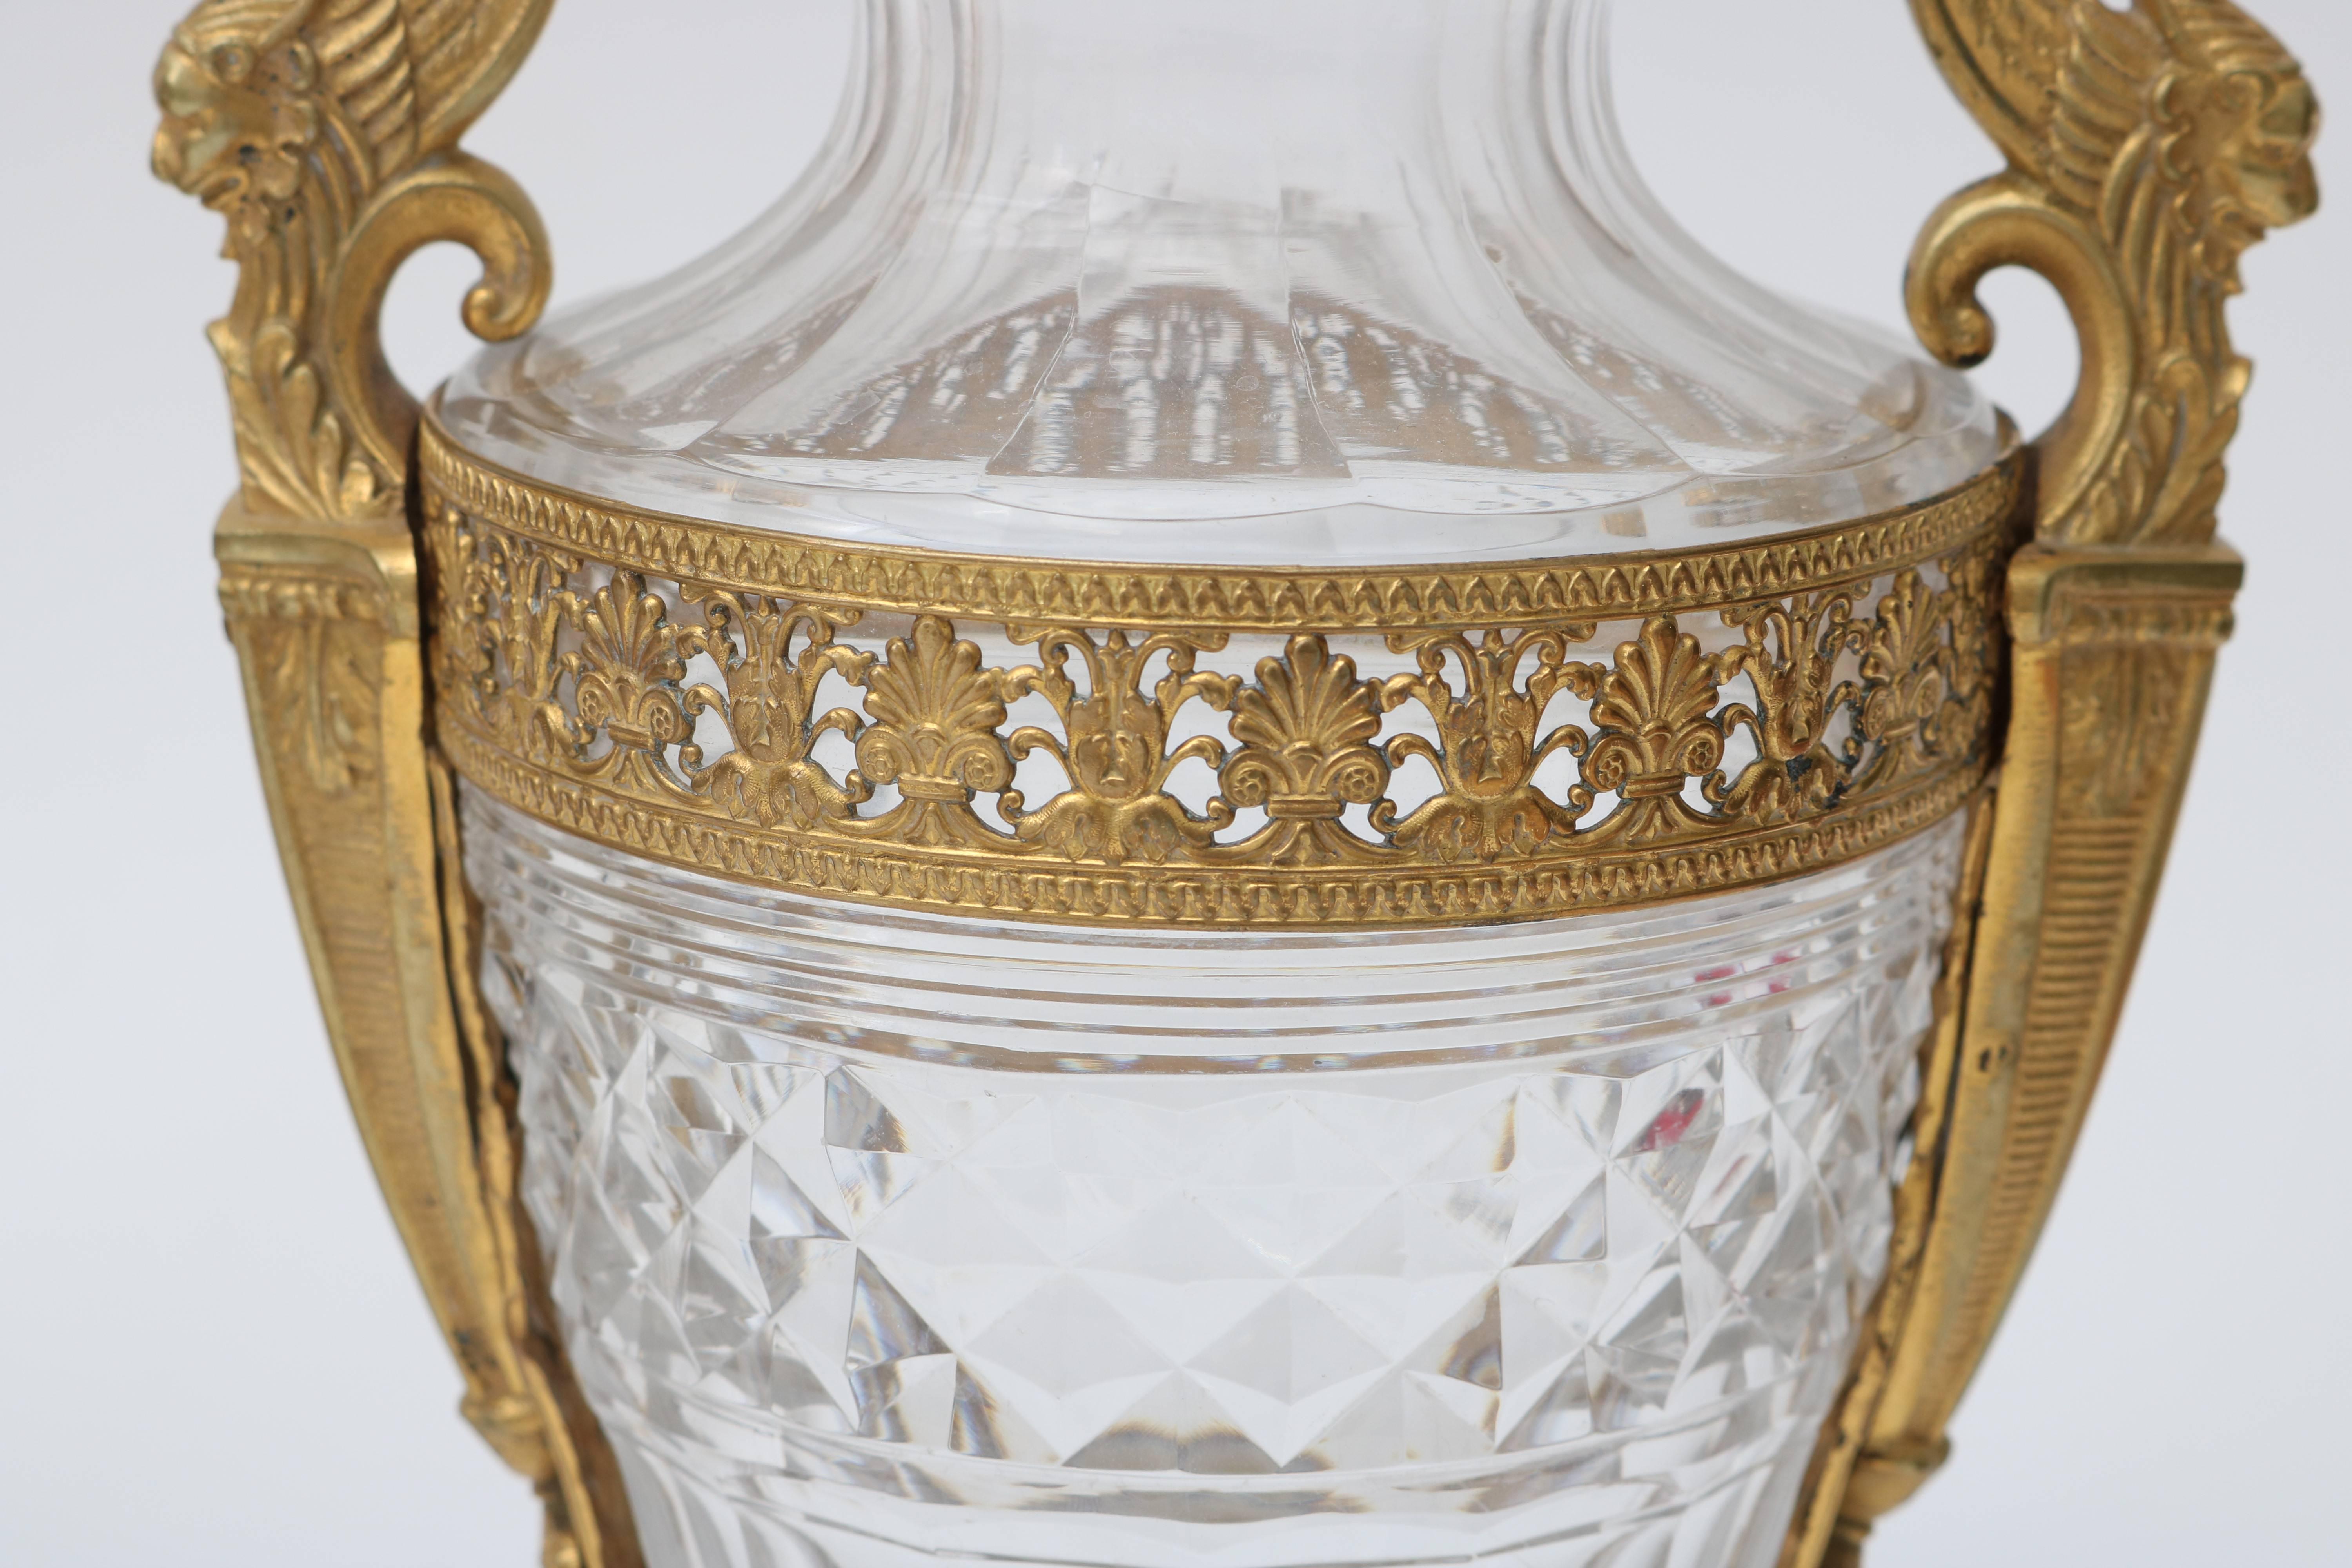  French Empire Style Bronze and Crystal Vases For Sale 1